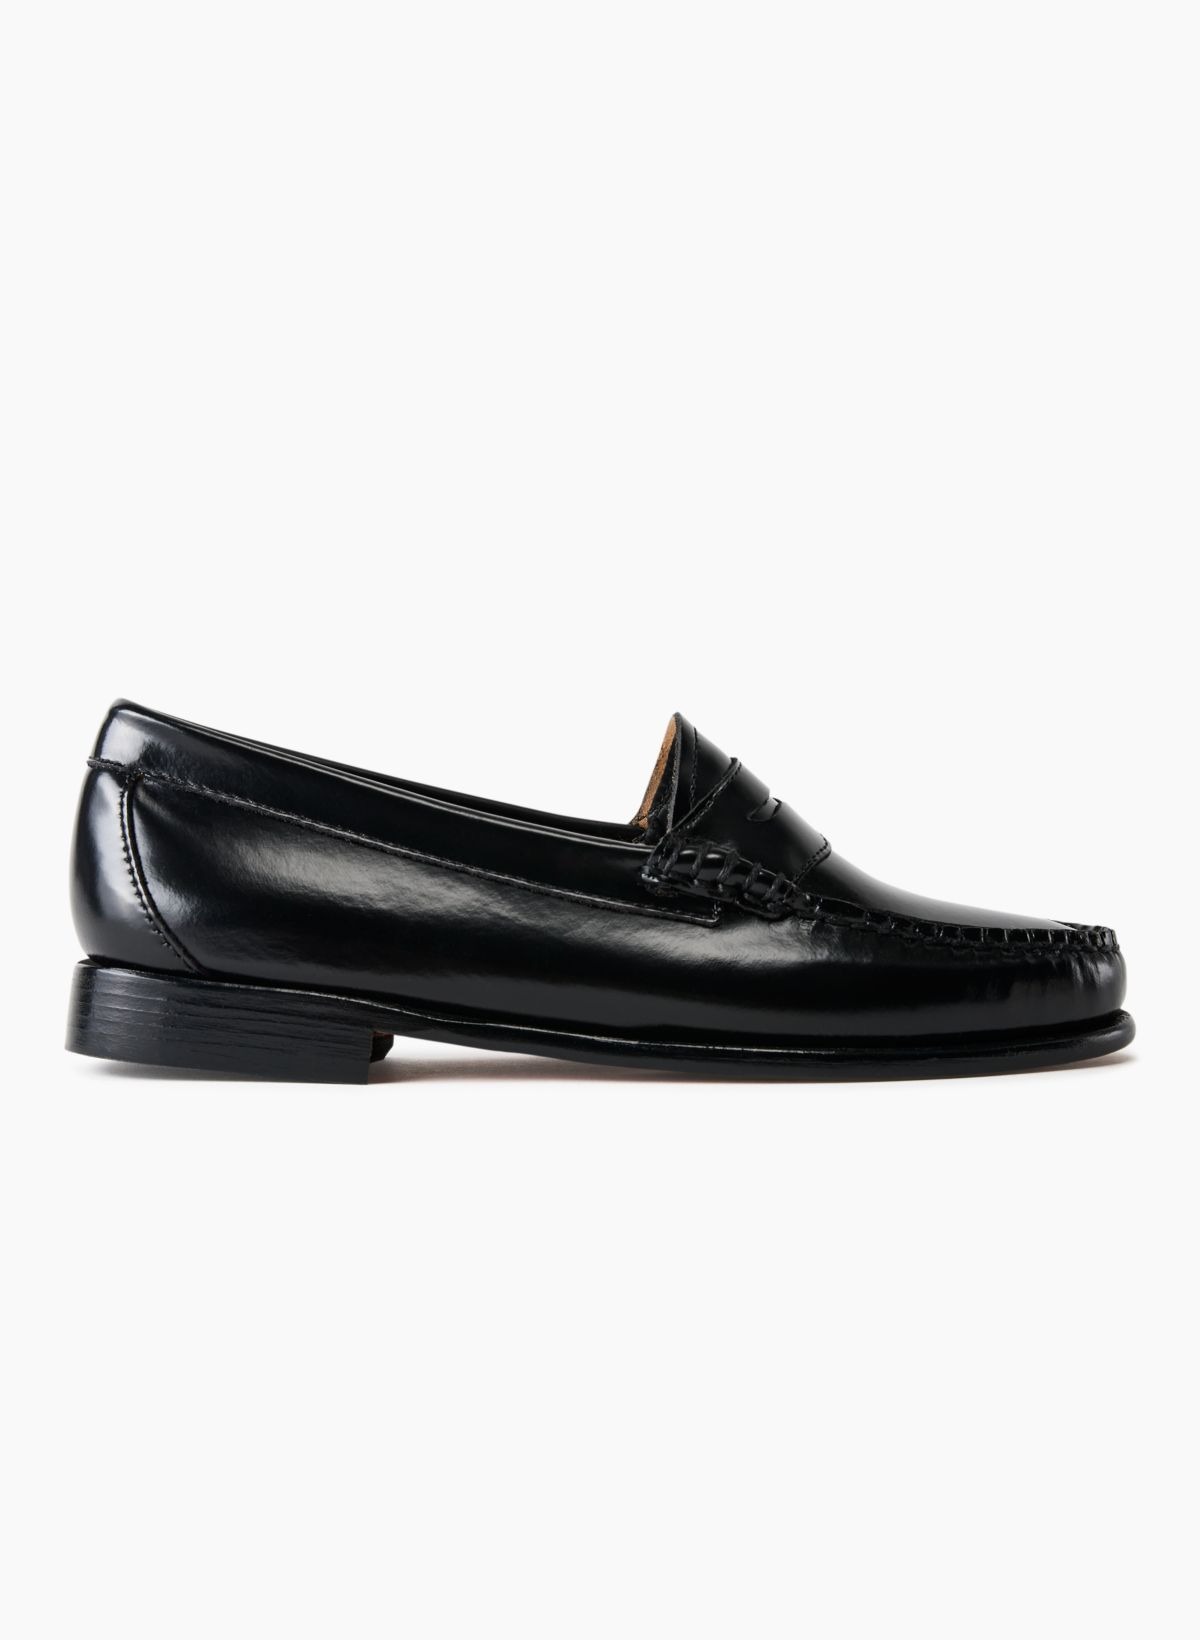 G.H. Bass Weejuns loafers